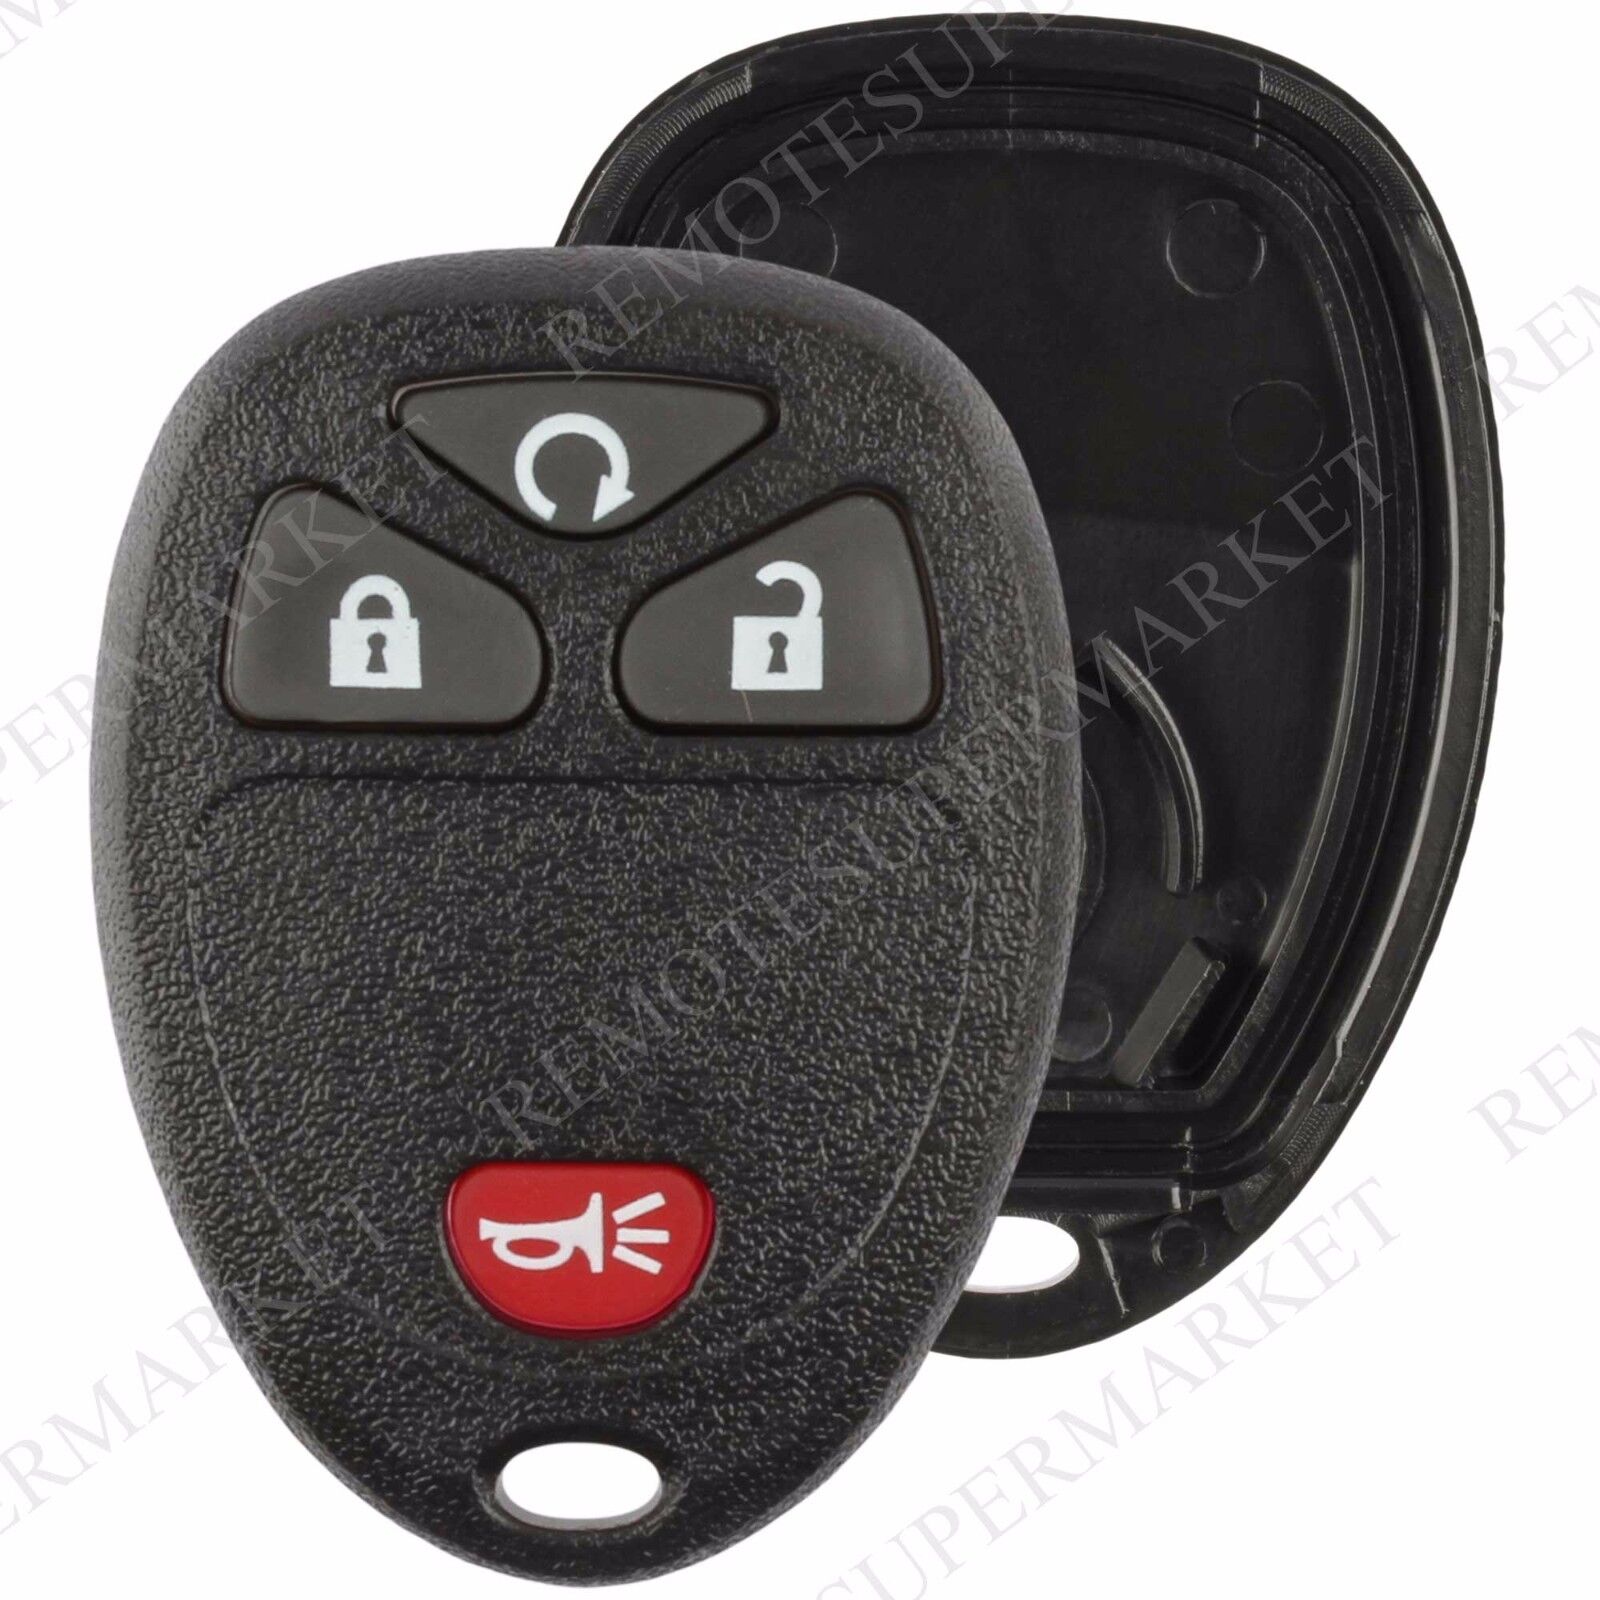 Replacement for Chevy Silverado Suburban 1500 Remote Key Fob 4b rs Shell Case